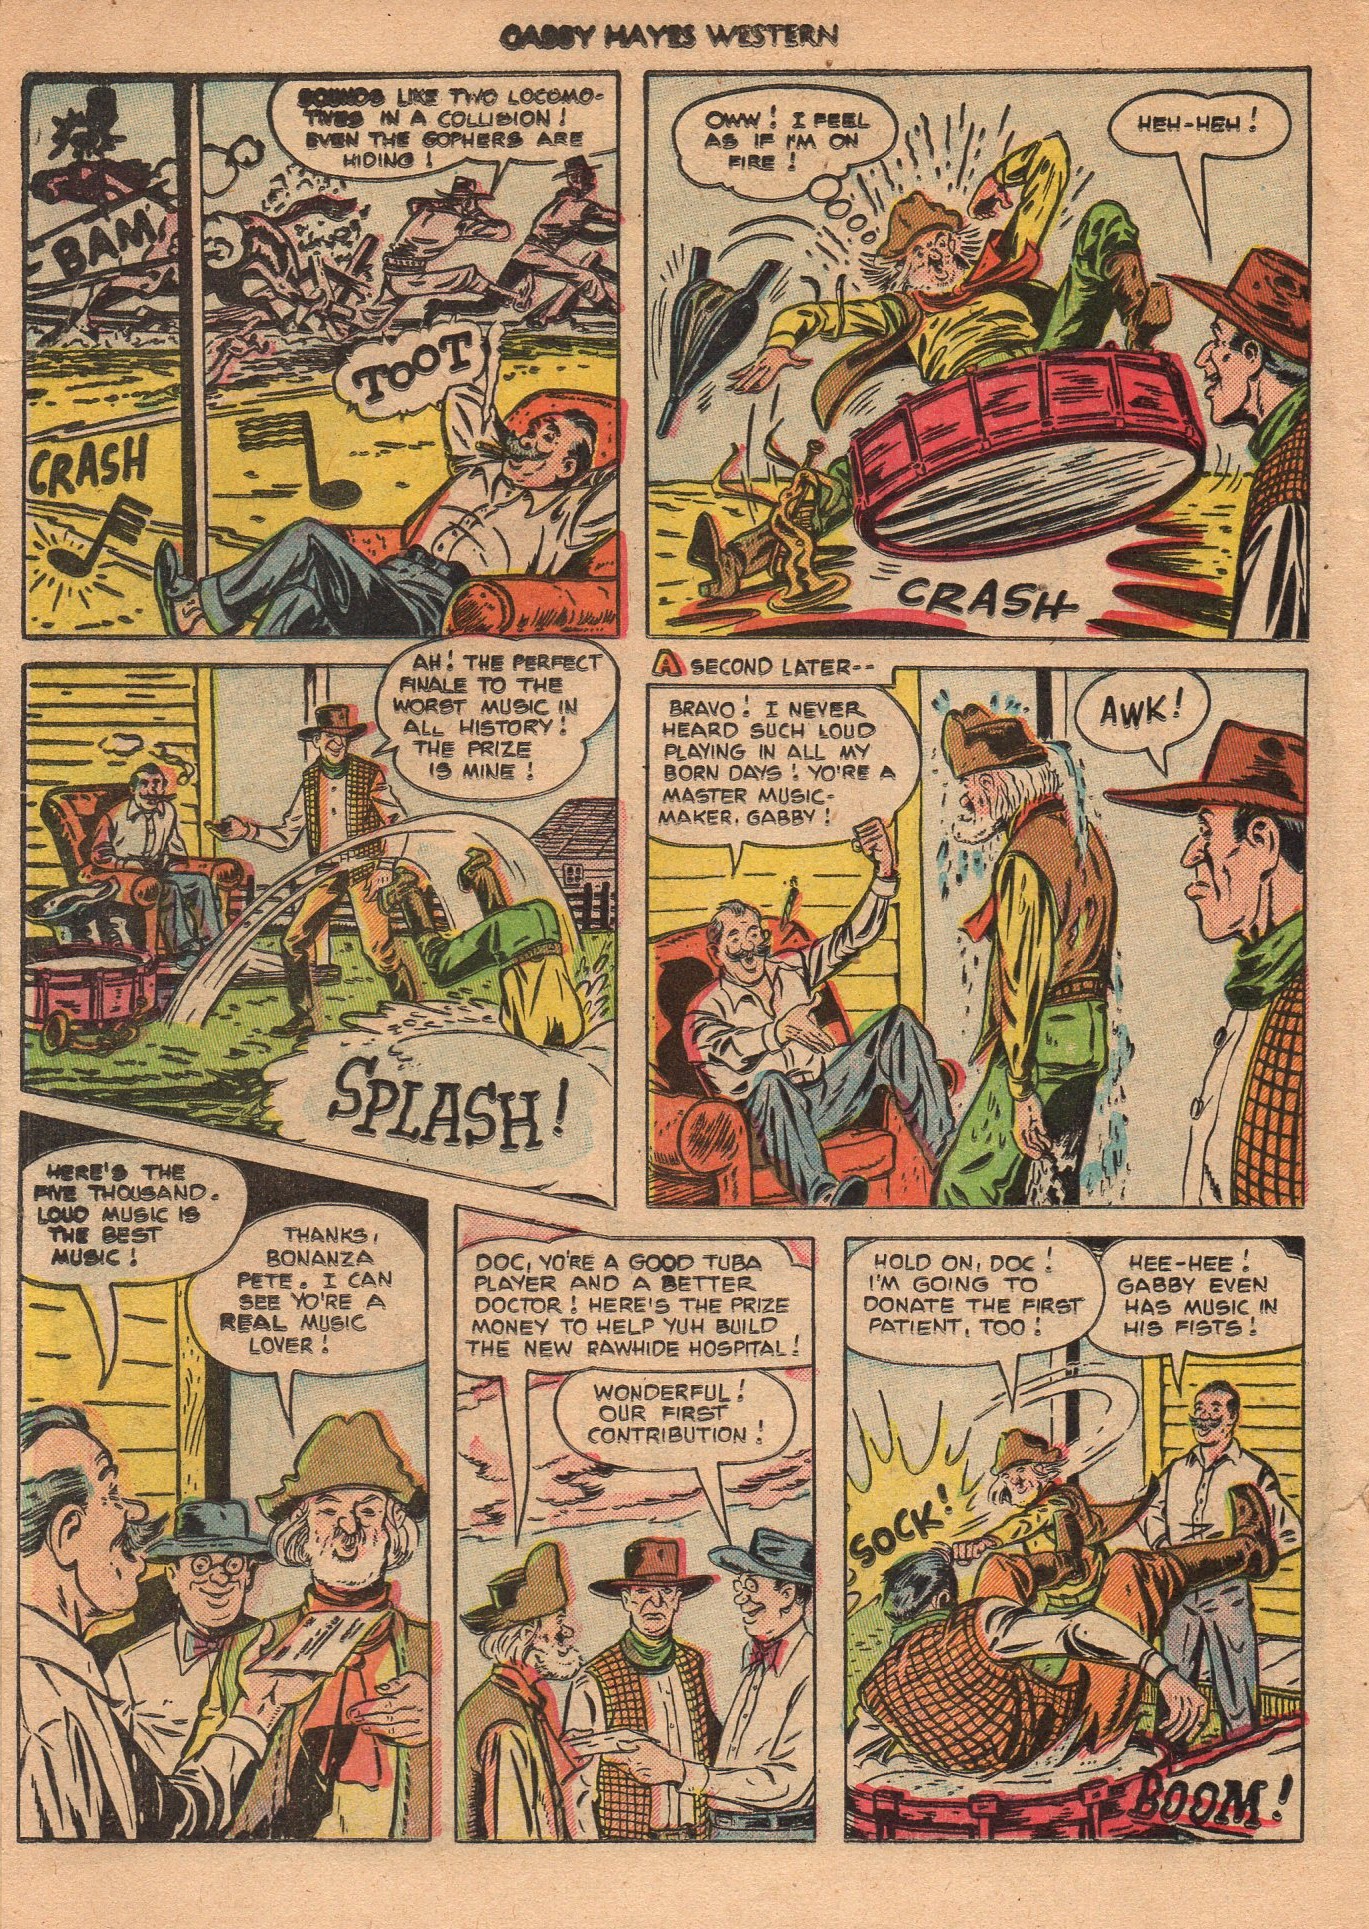 Read online Gabby Hayes Western comic -  Issue #46 - 20